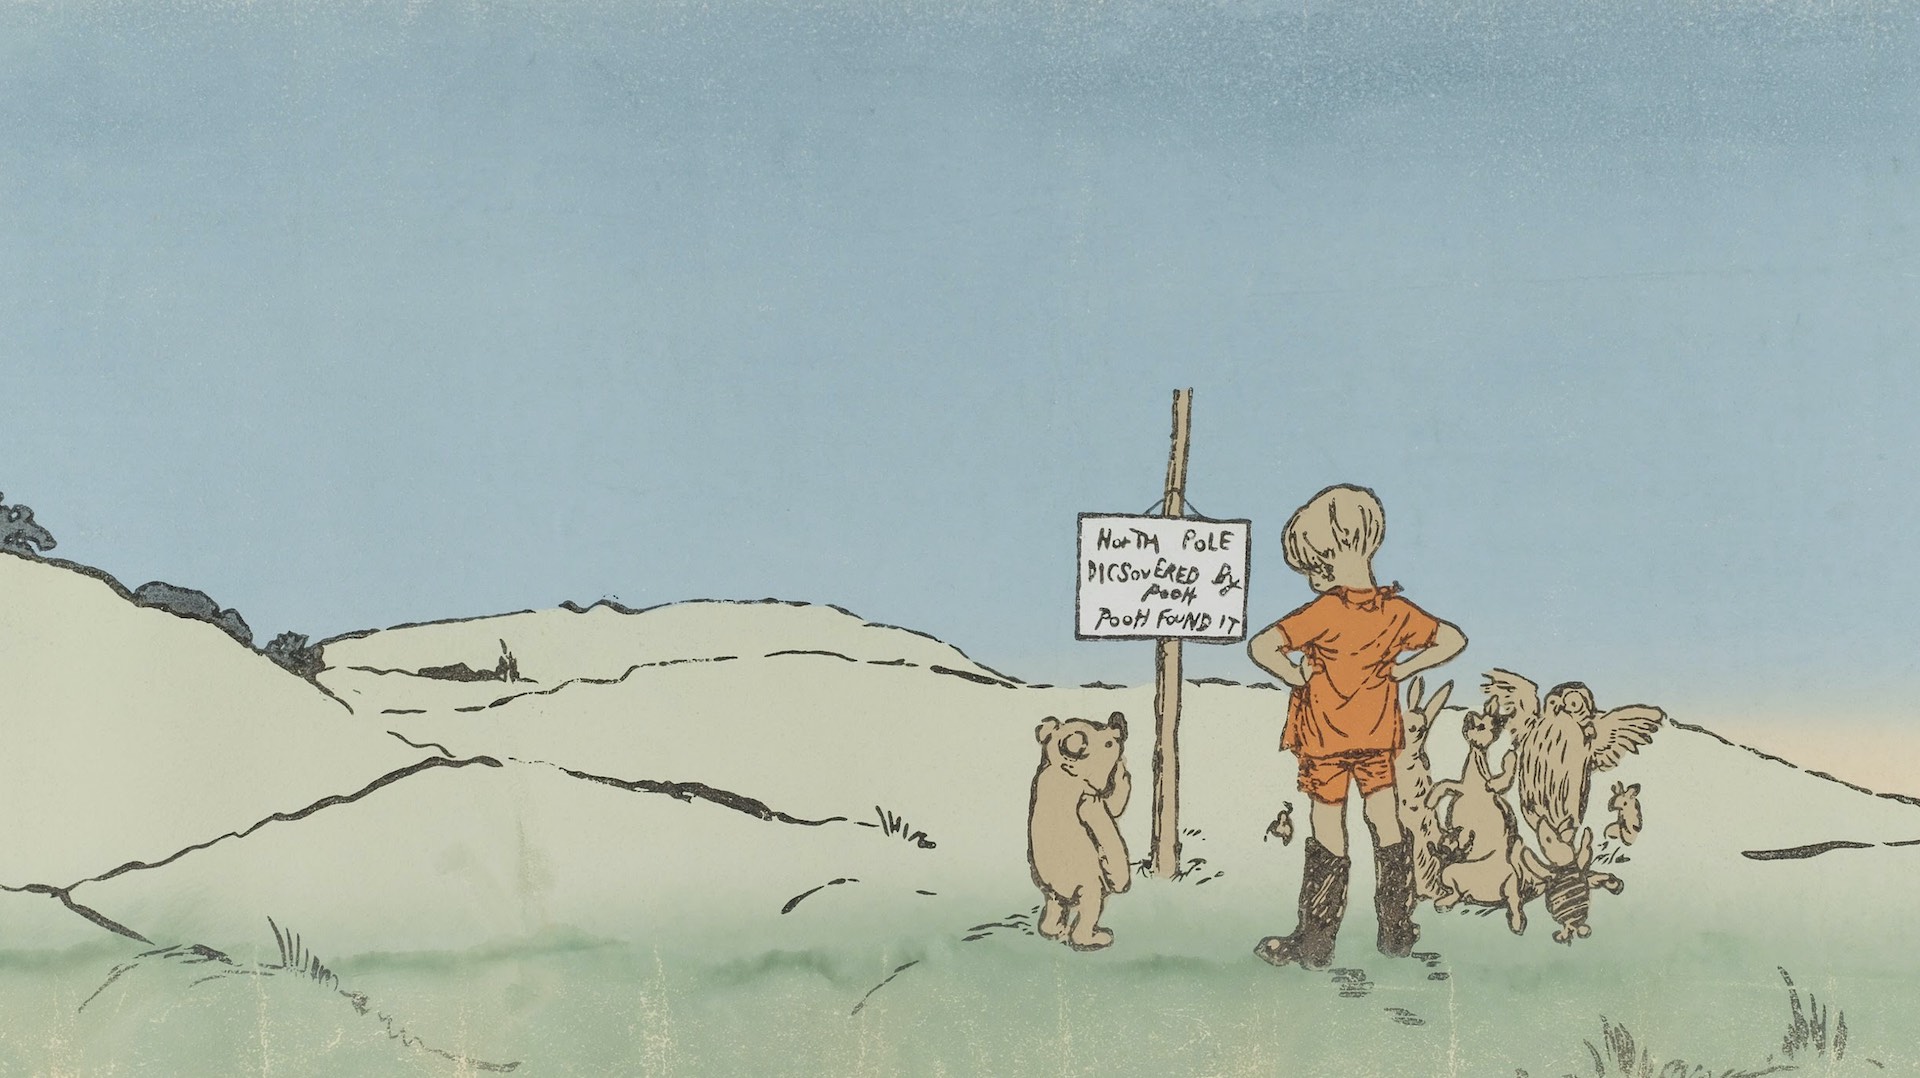 "Christopher Robin leads an expedition," E. H. Shepard (illustrator). Characters from the book gather around a sign that says: "North Pole, Discovered by Pooh, Pooh found It."